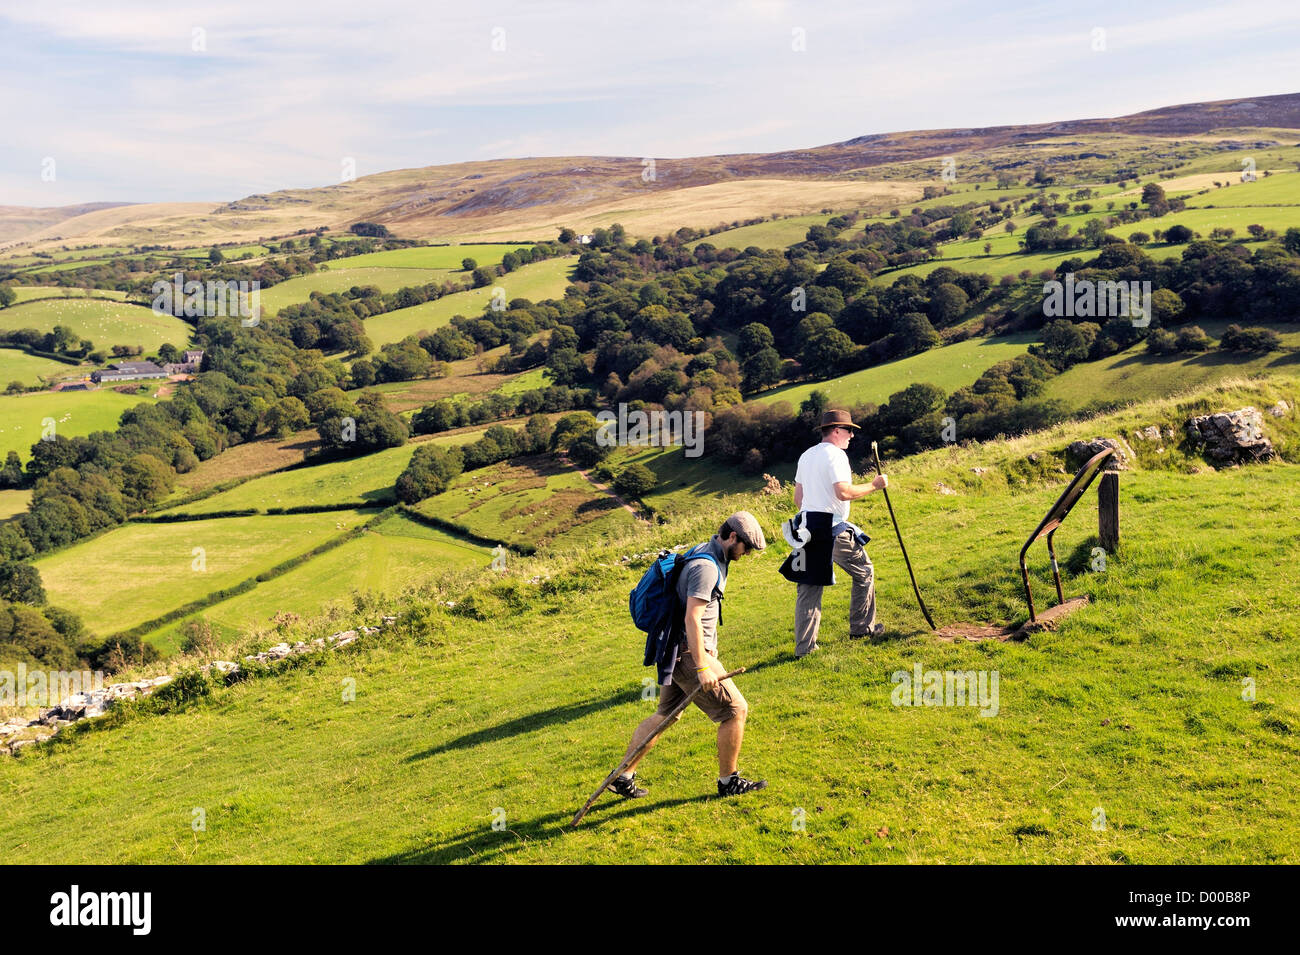 Walkers in the Brecon Beacons National Park, Wales, UK. East from Carreg Cennen castle over hill farm toward the Black Mountain Stock Photo